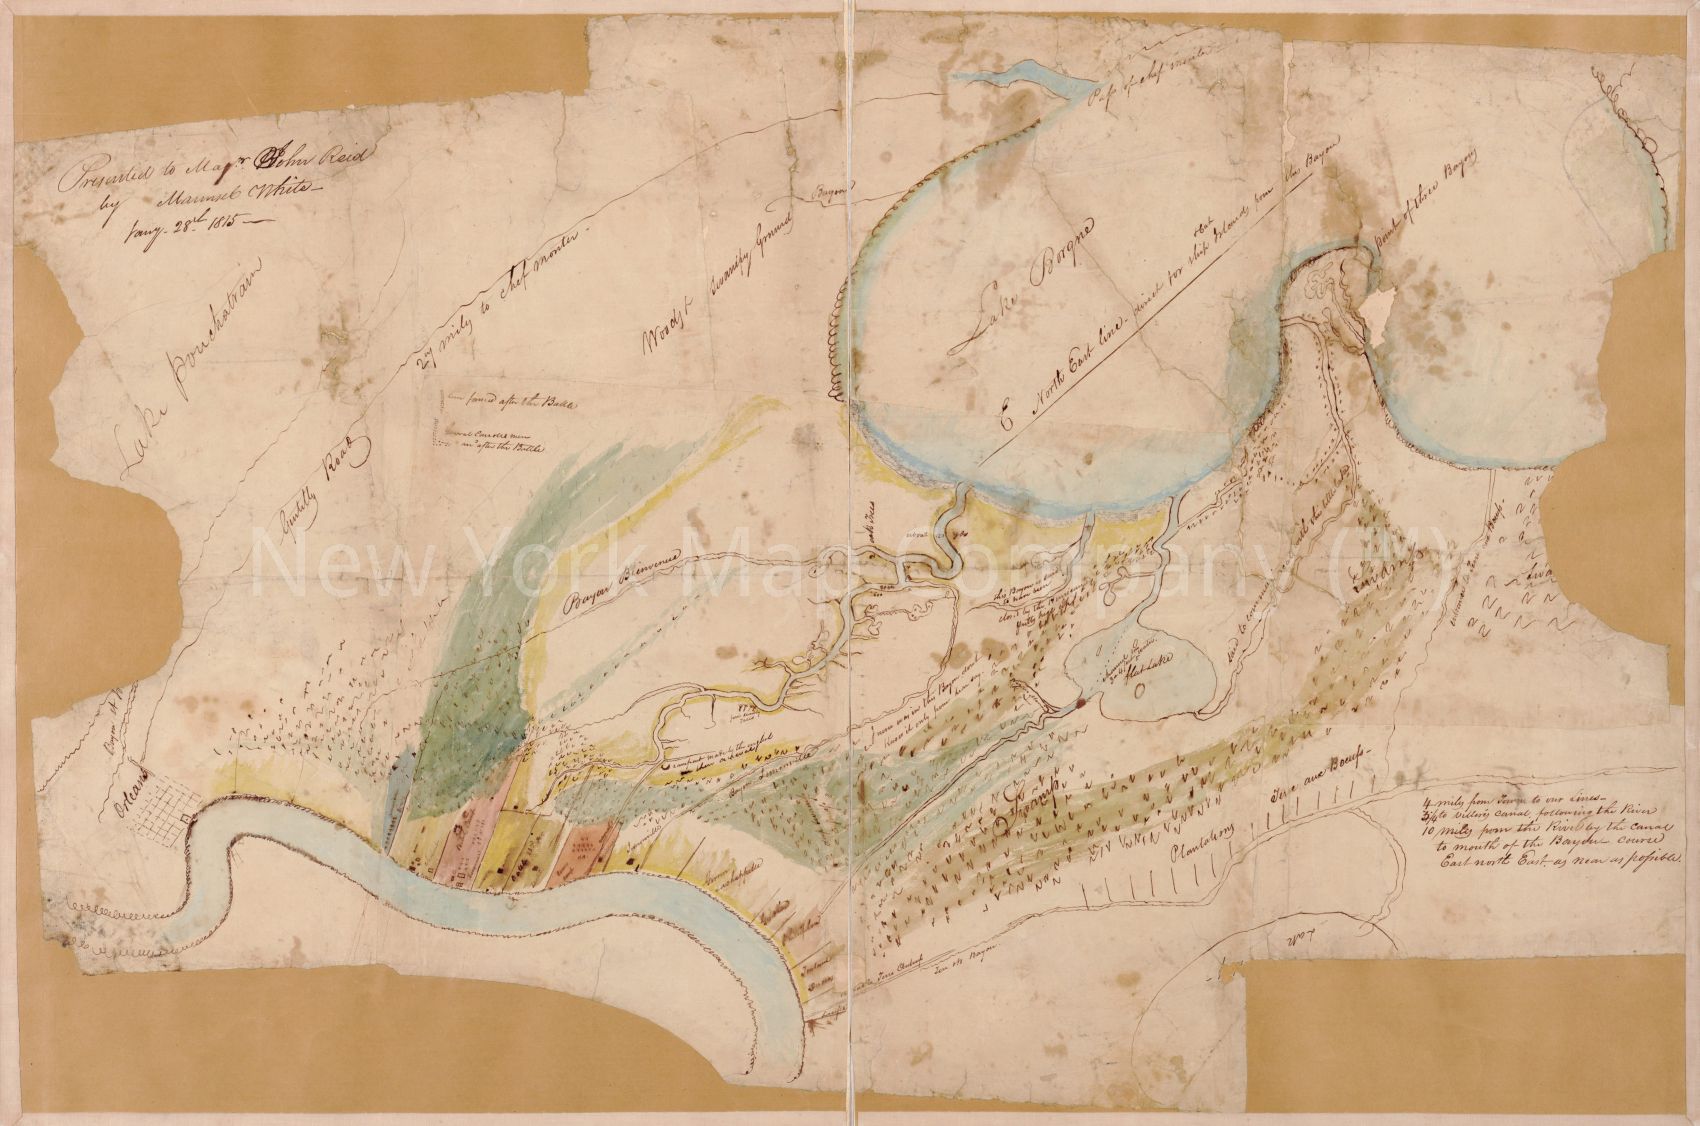 1815 map 1814-15 New Orleans. Presented to Major John Reid by Maunsel White, January 28, 1815. Map Subjects: History | Louisiana | New Orleans Metropolitan Area | New Orleans Metropolitan Area La | War of 1812